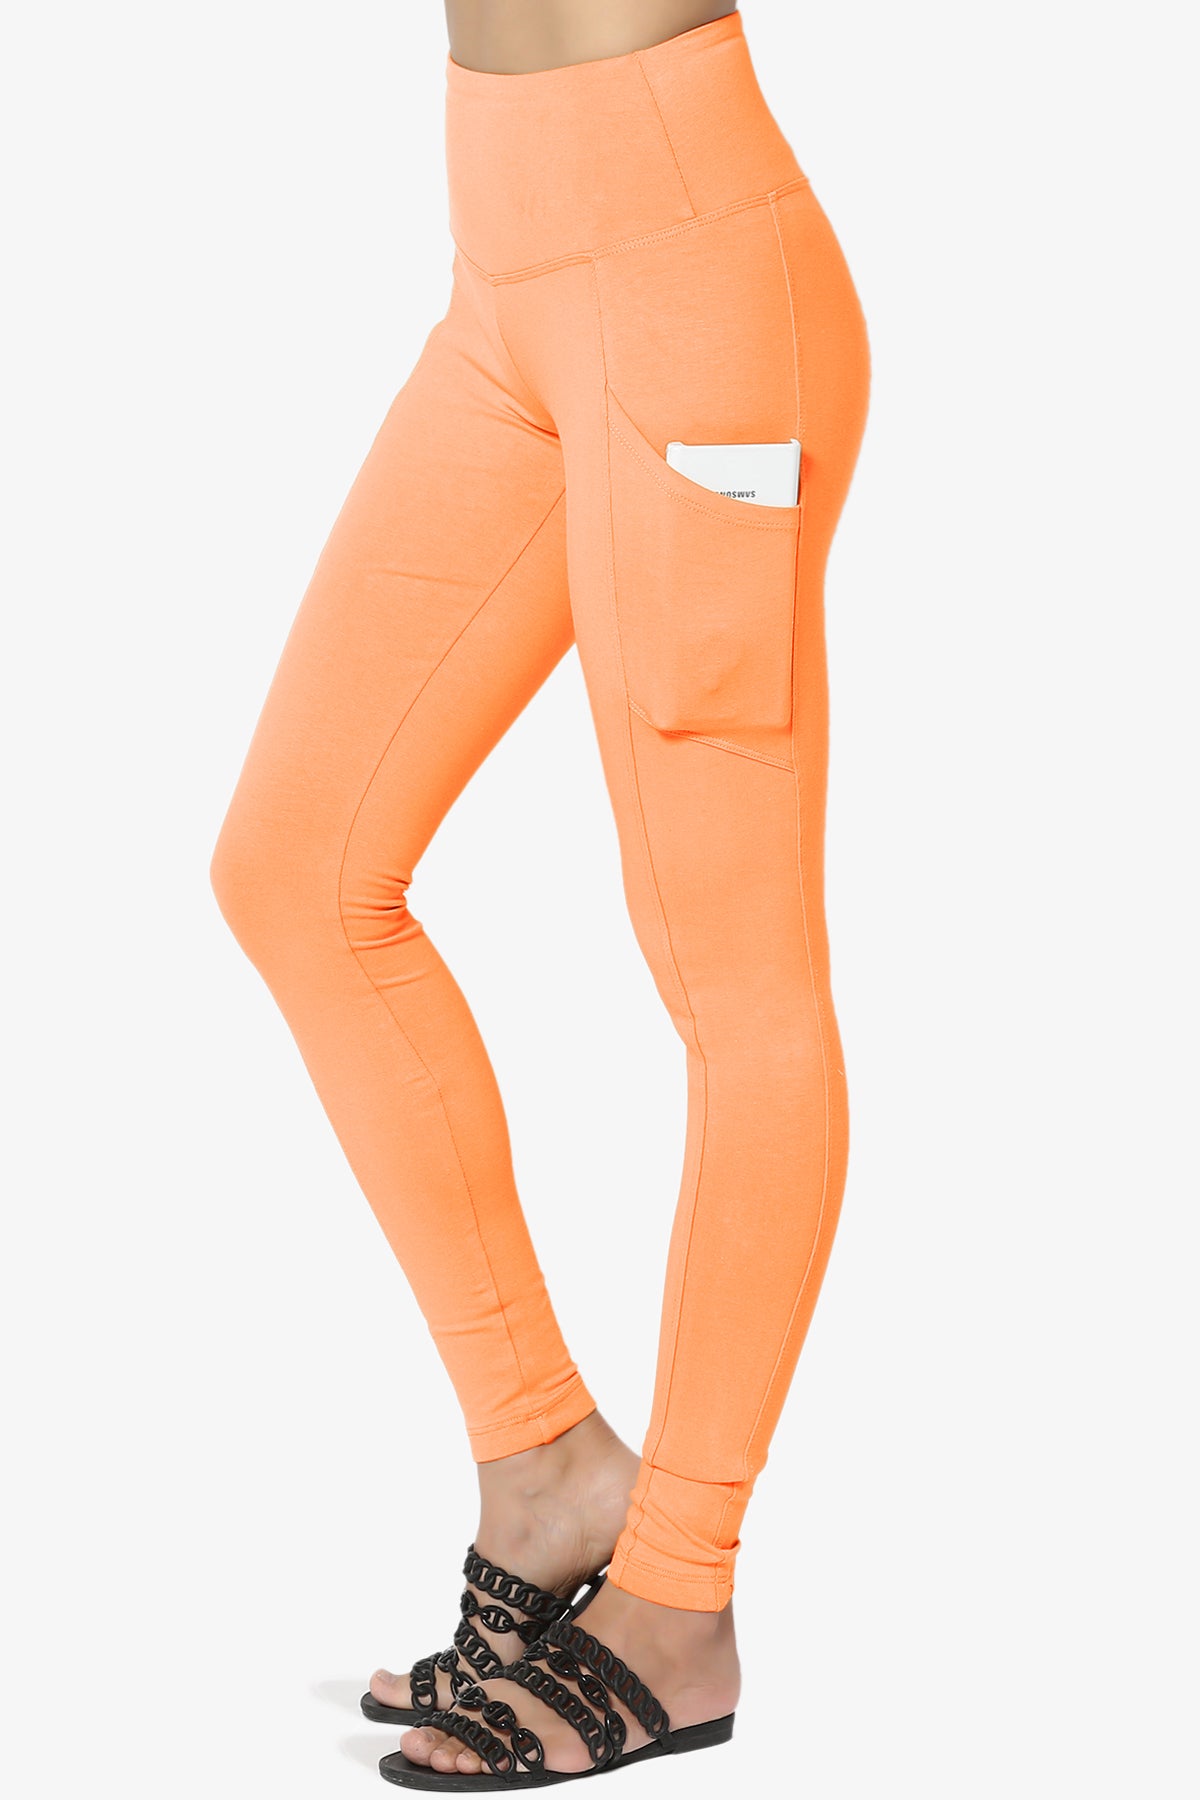 Ansley Luxe Cotton Leggings with Pockets NEON CORAL_1